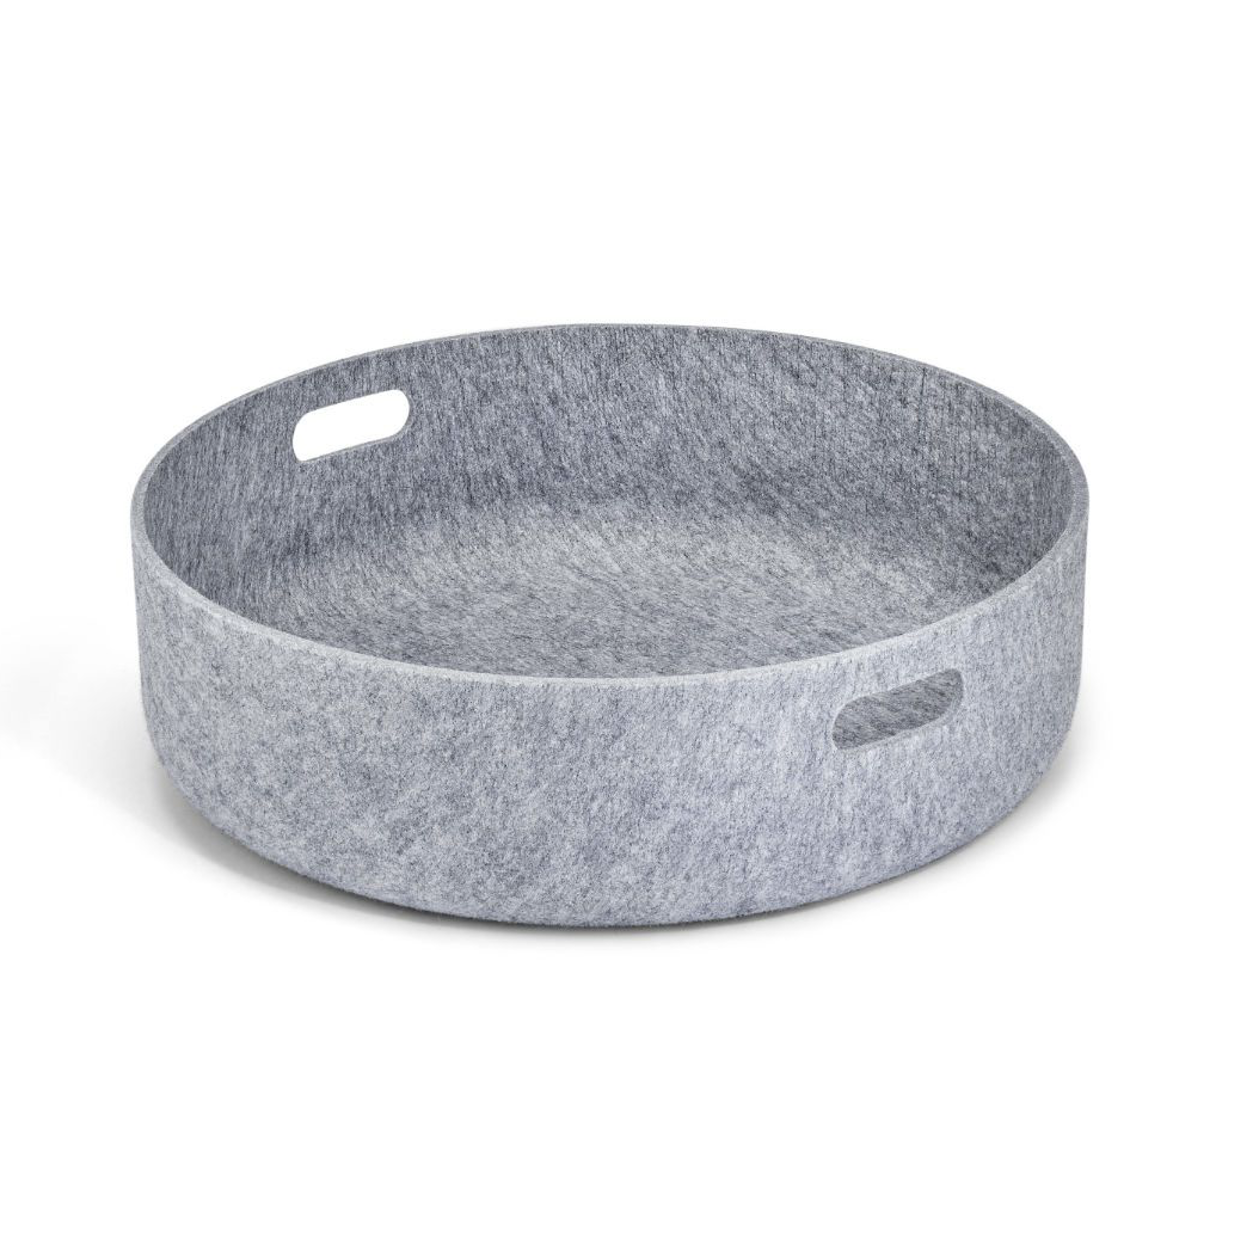 grey shallow basket with handles